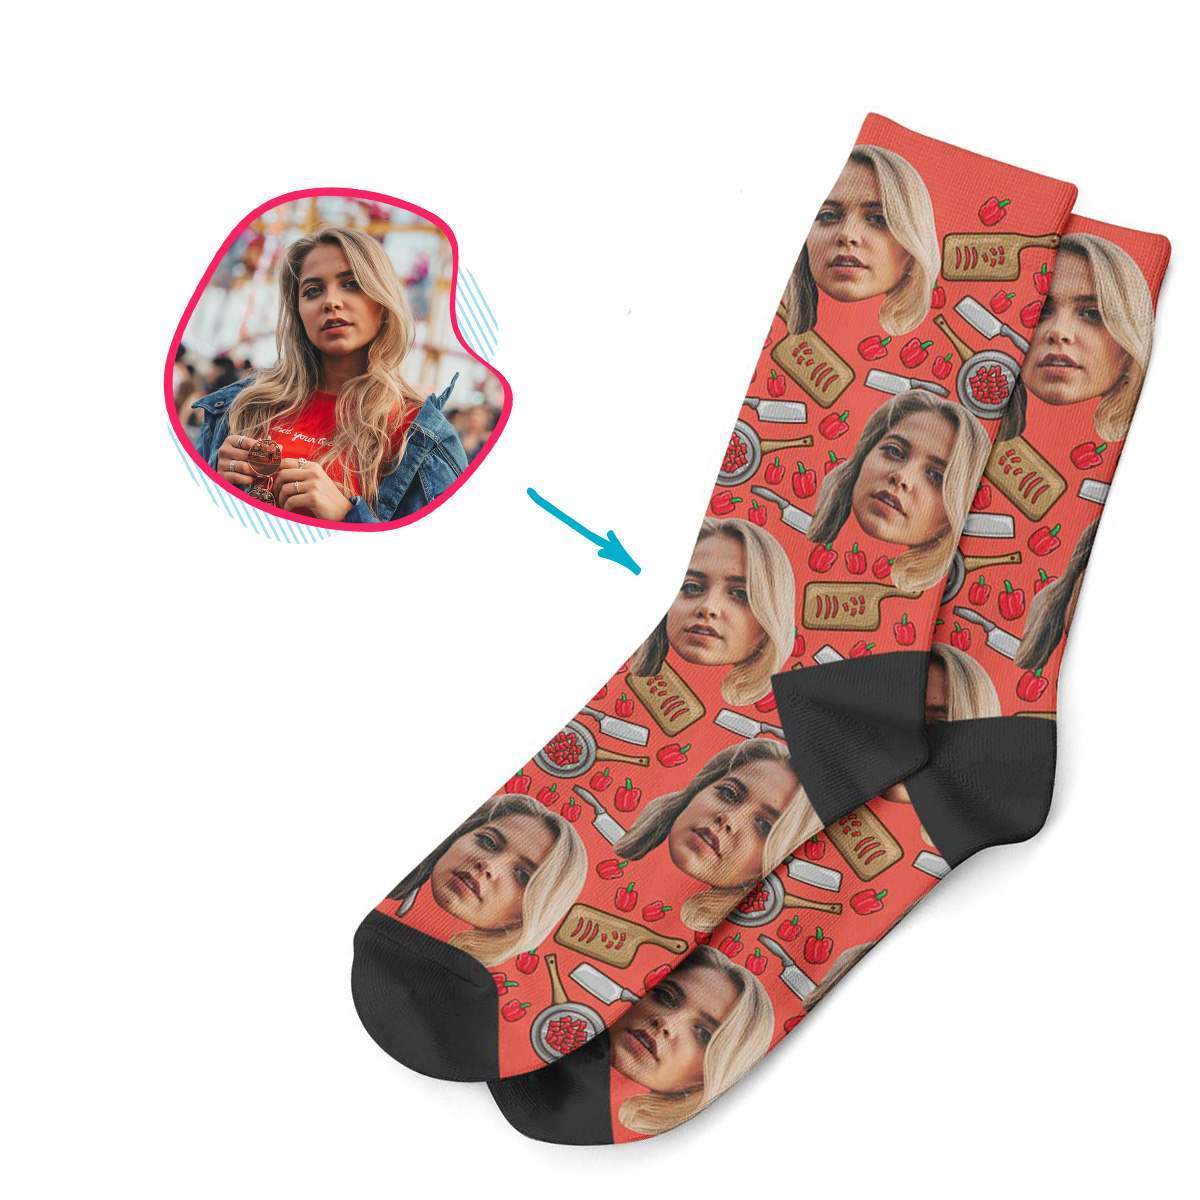 red Сooking socks personalized with photo of face printed on them